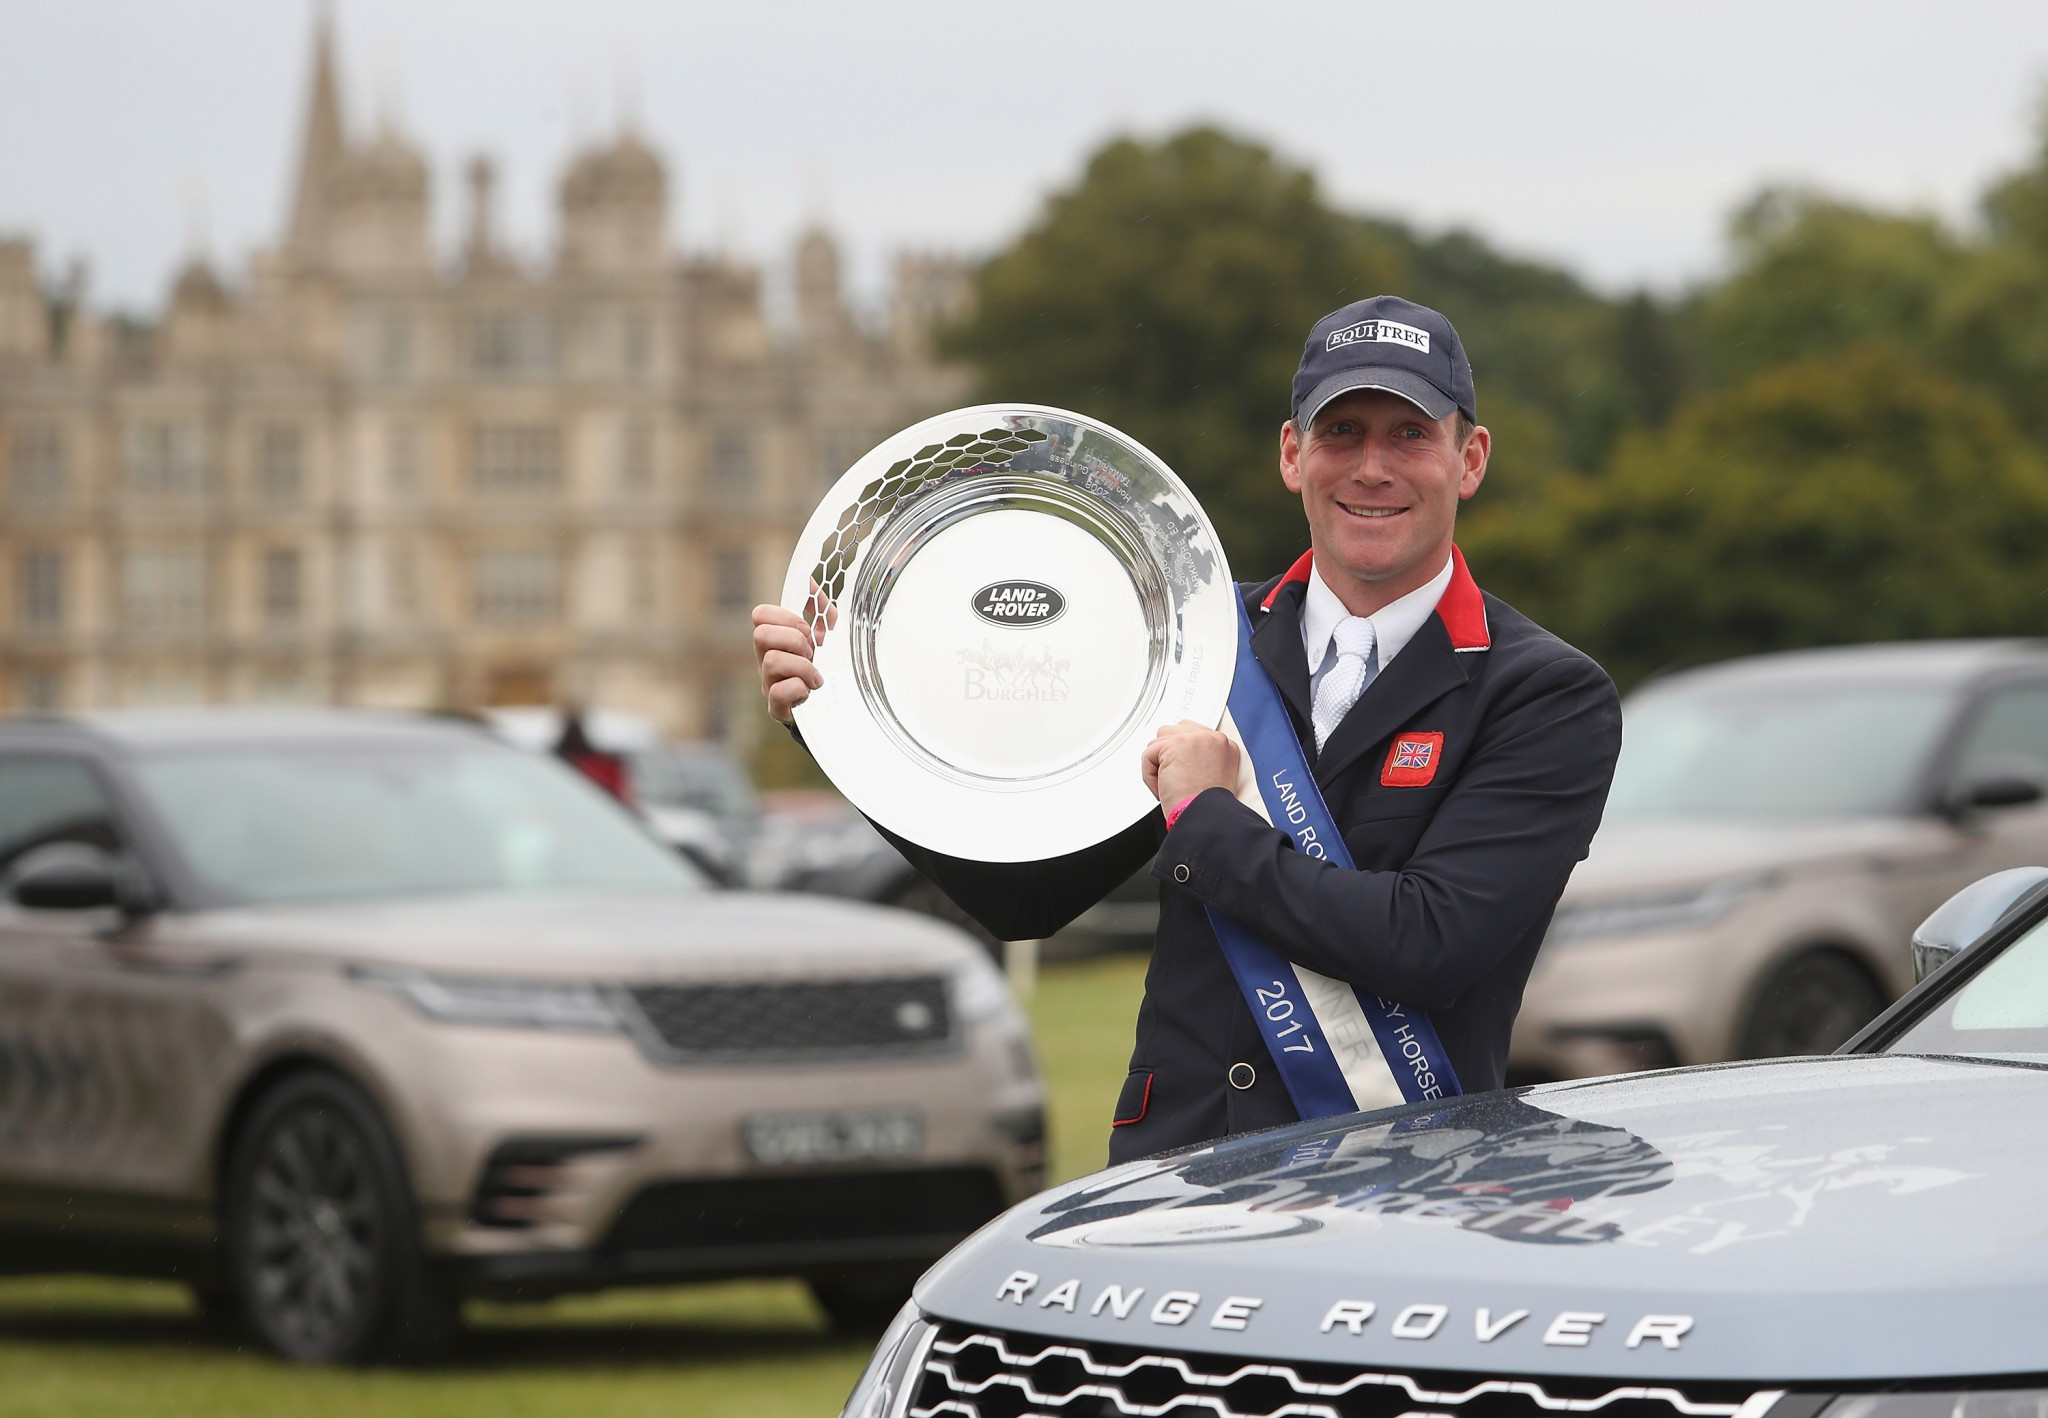 Oliver Townend won the prestigious Burghley Horse Trials title ©Getty Images 